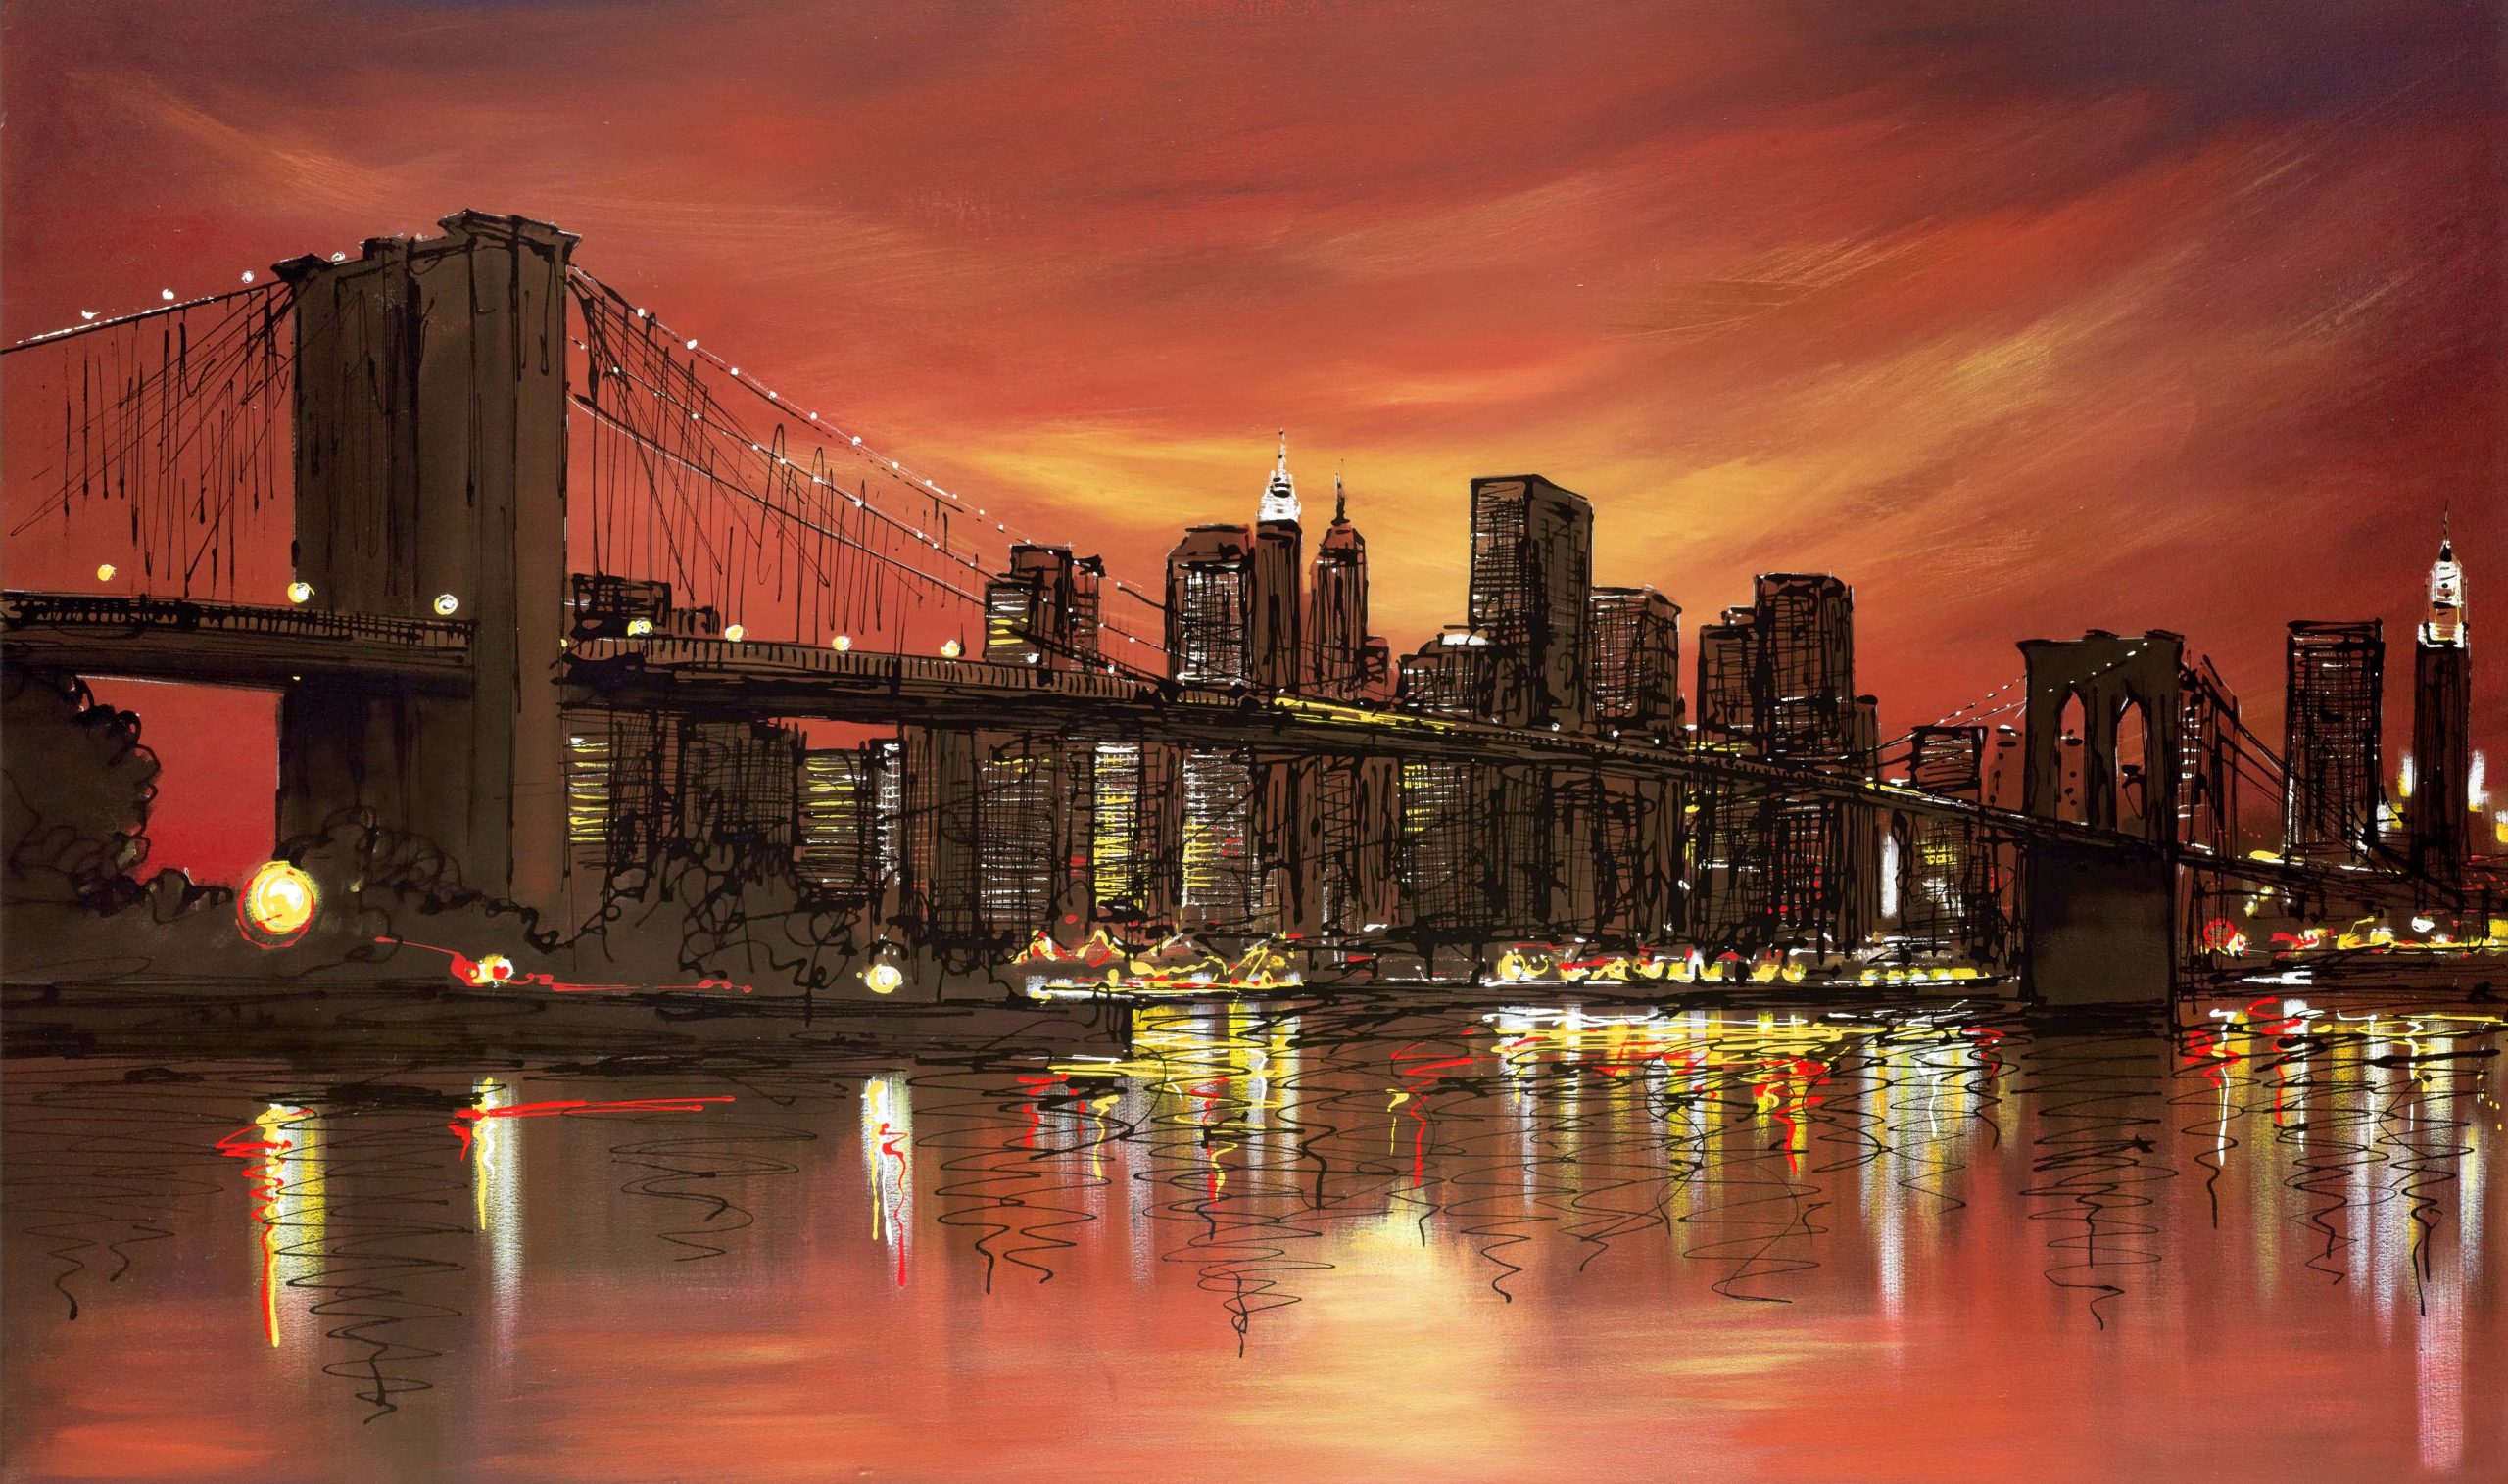 Hot City by Paul Kenton, UK contemporary cityscape artist, a limited edition print from his New York Collection